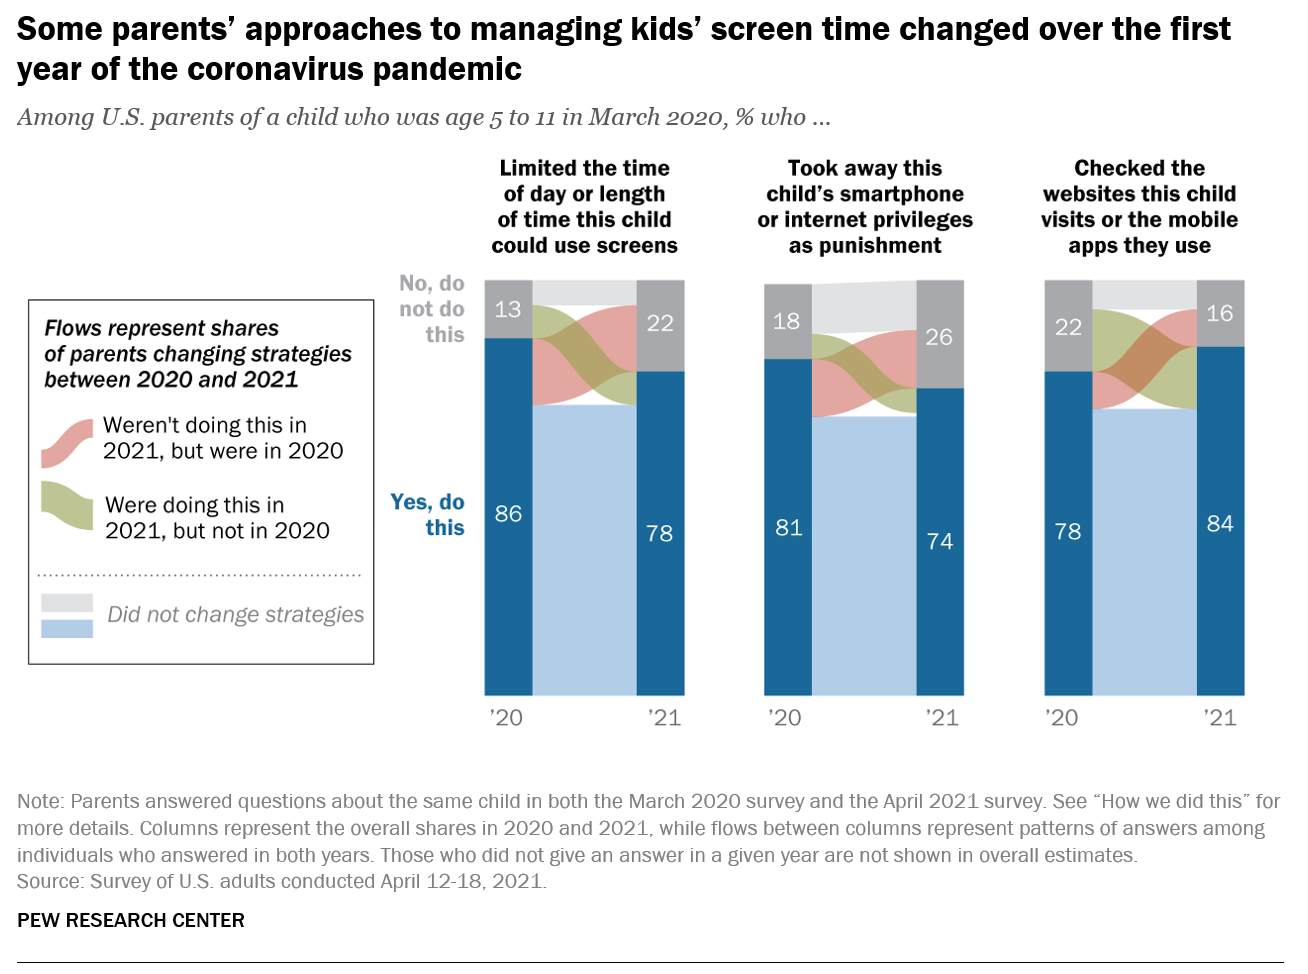 Some parents’ approaches to managing kids' screen time changed over the first year of the coronavirus pandemic 2020-2021.